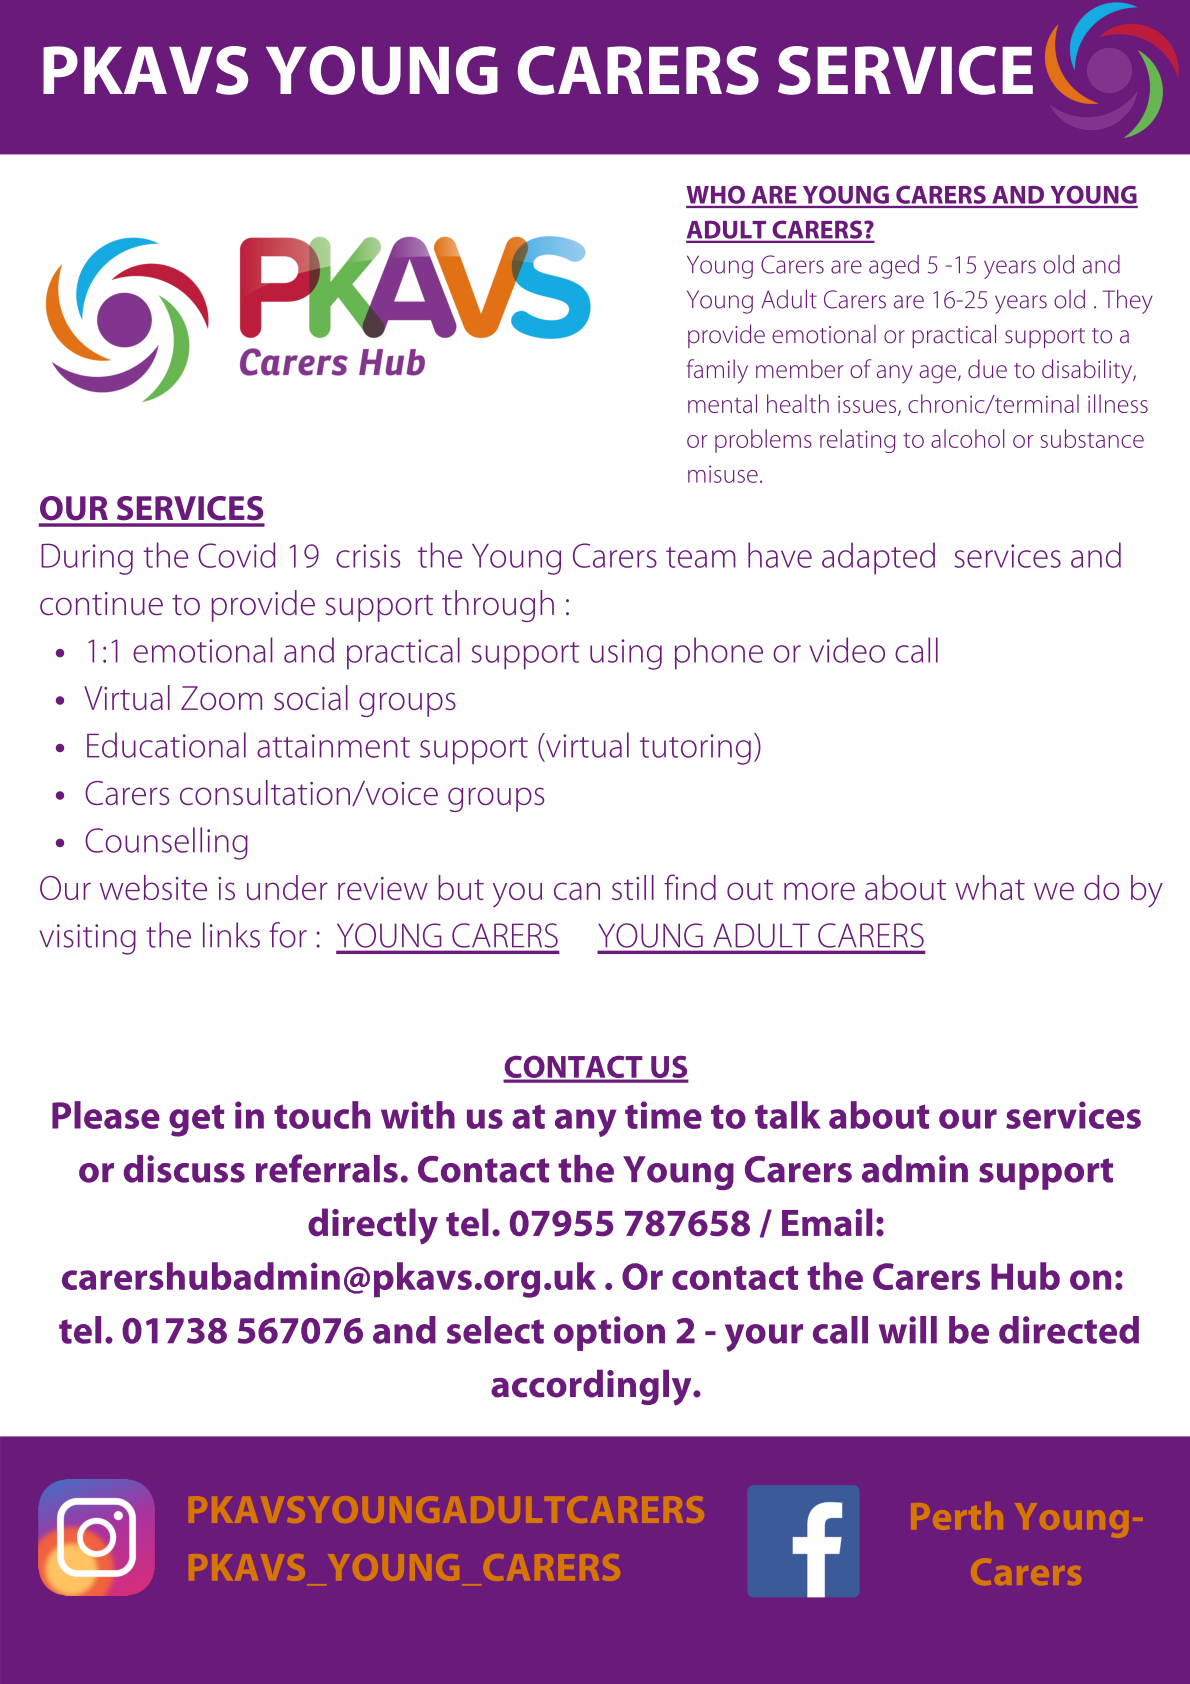 Information poster on Young Carers Service